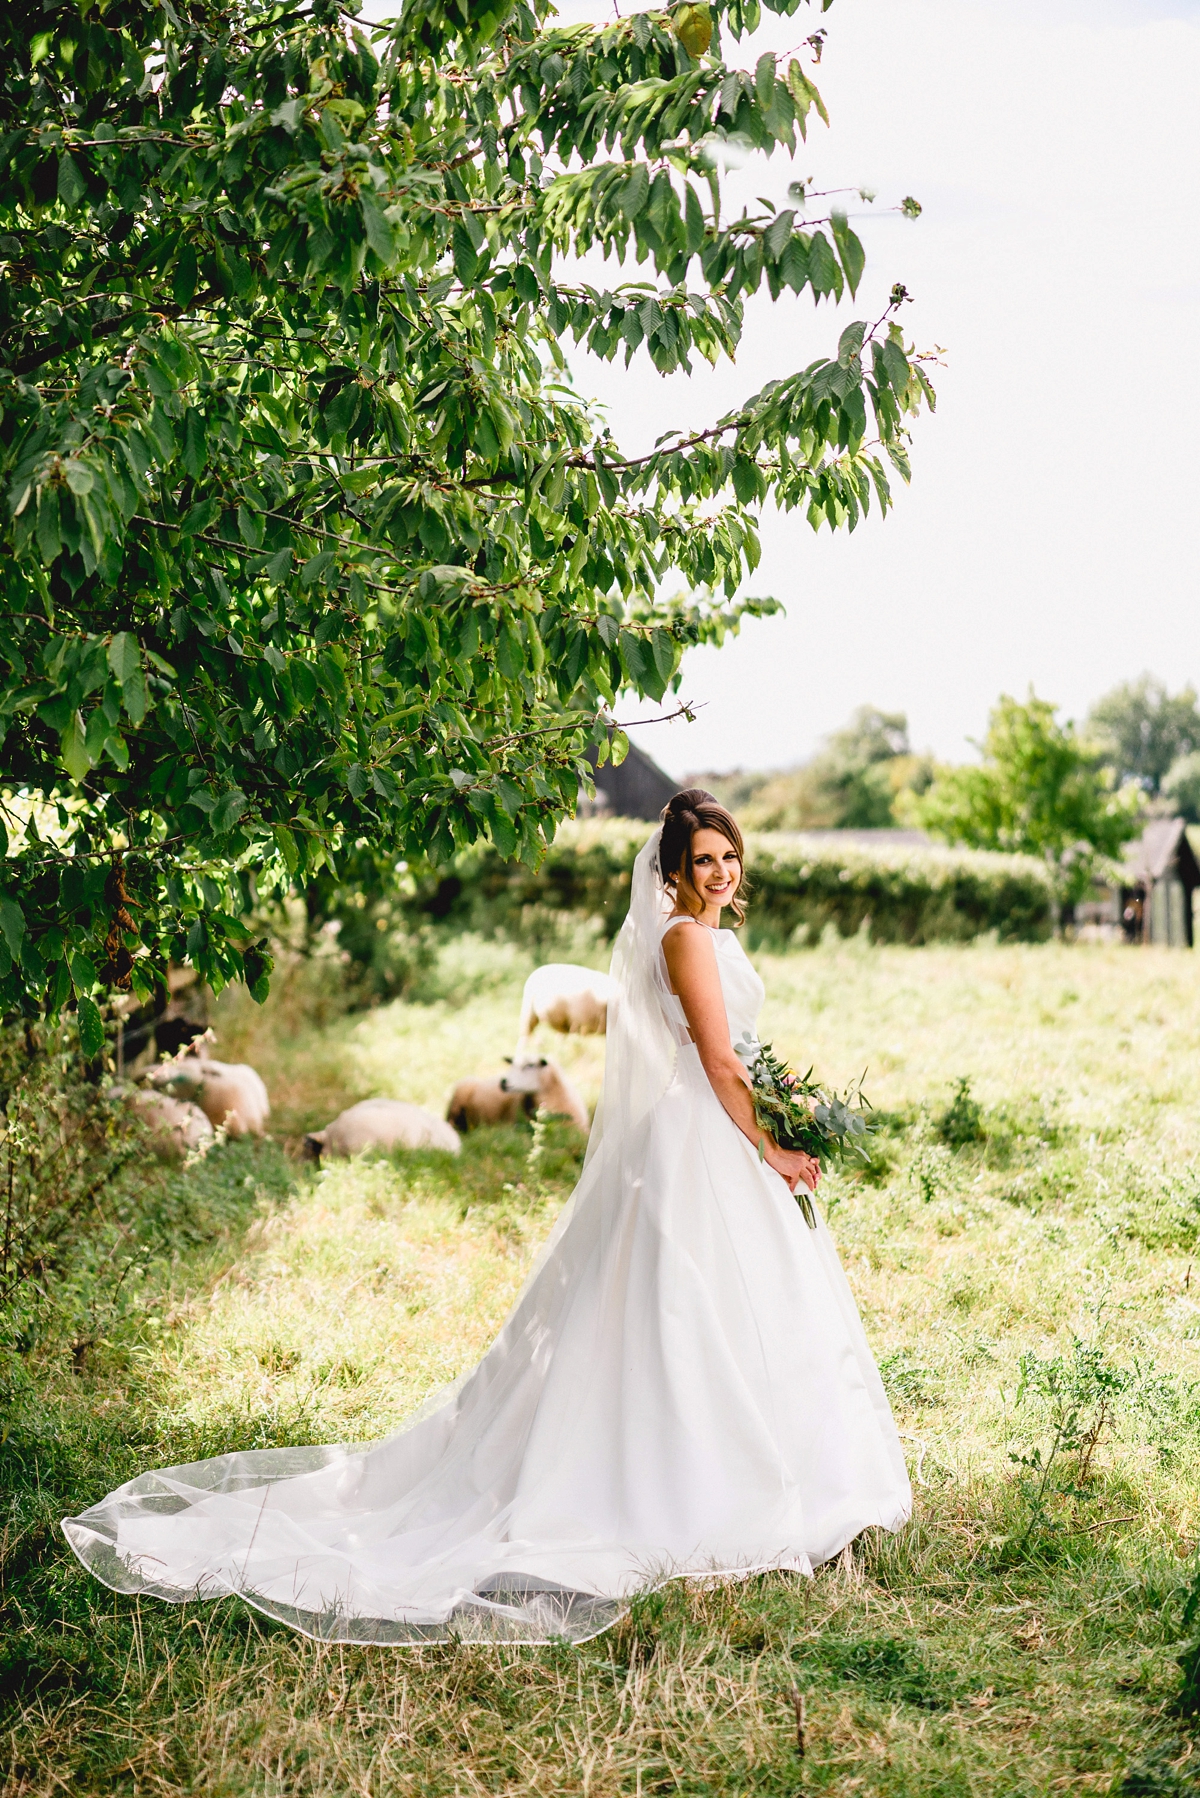 12 A Pronovias backless gownf or a simple relaxed barn wedding